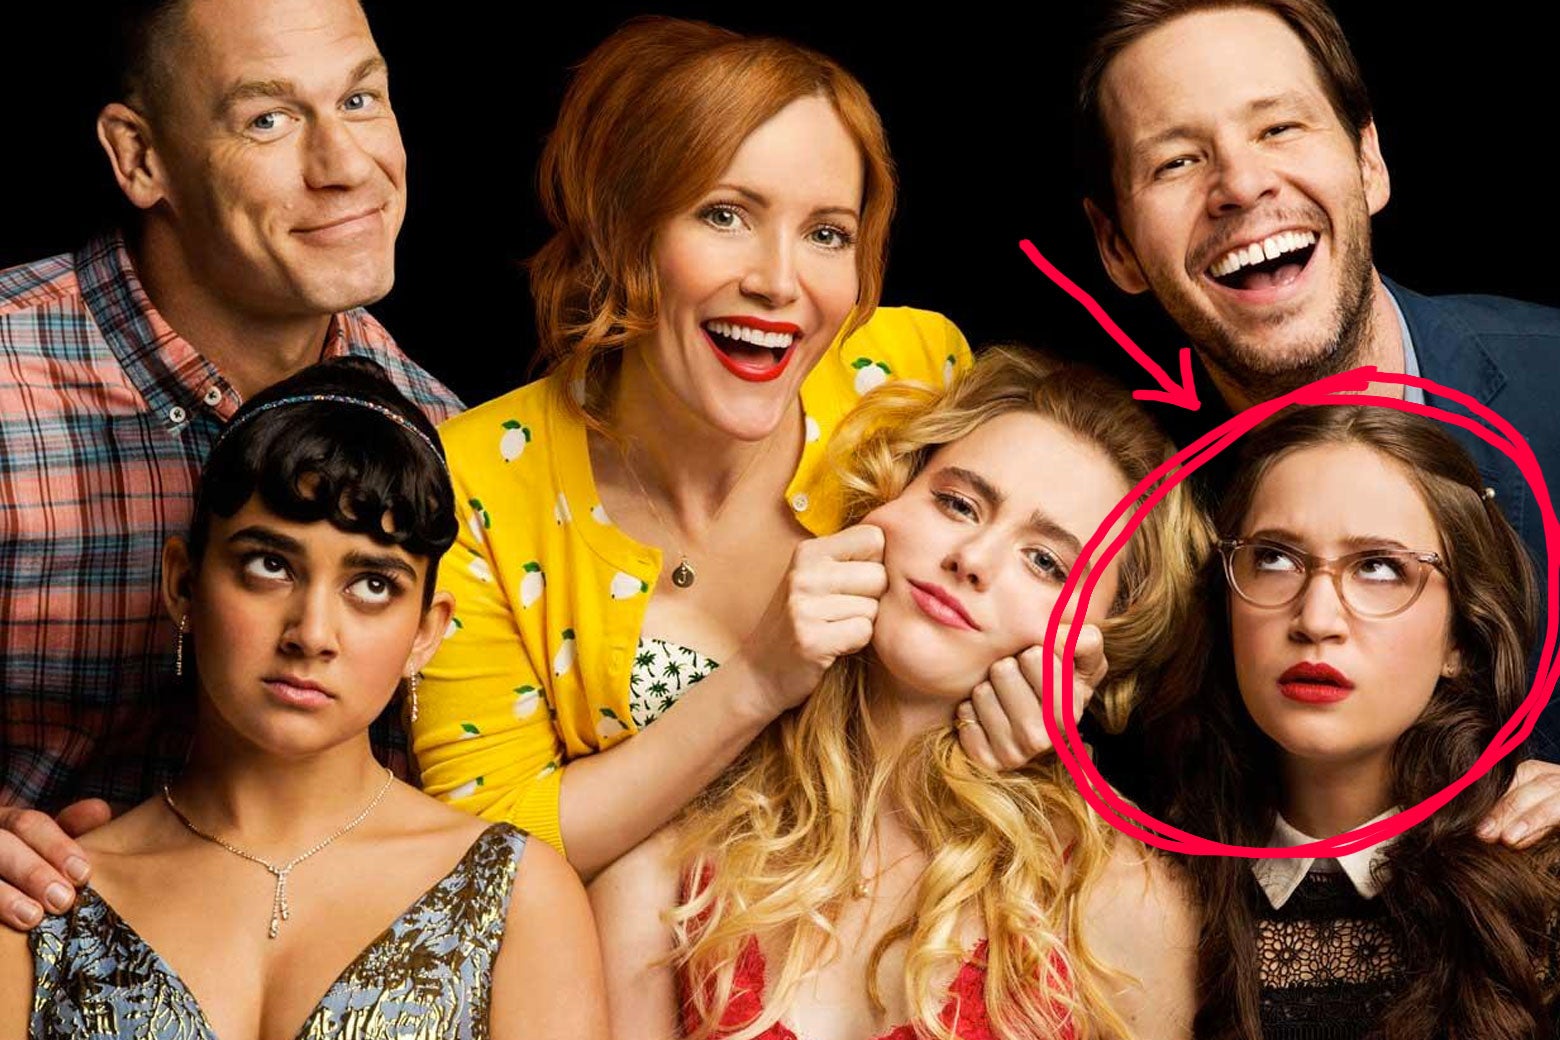 The cast of Blockers with Sam’s character circled in red with an arrow pointing to her.